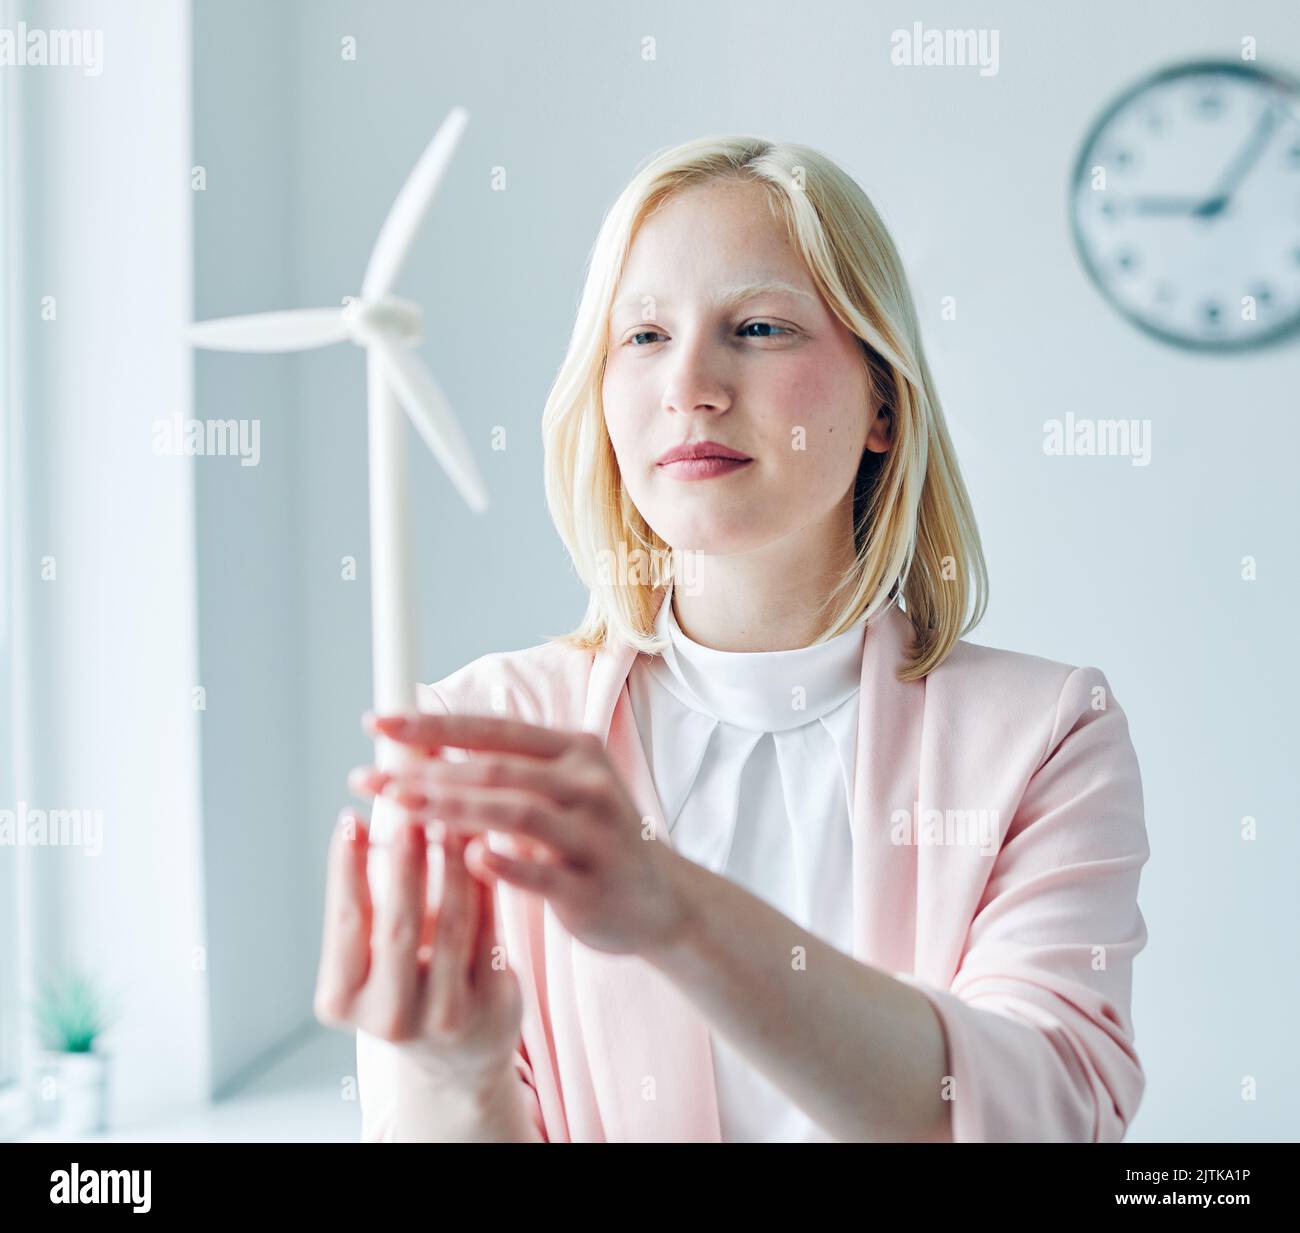 business woman portrait office businesswoman young windmill energy environment electricity power innovation model ecology renewable eco green Stock Photo